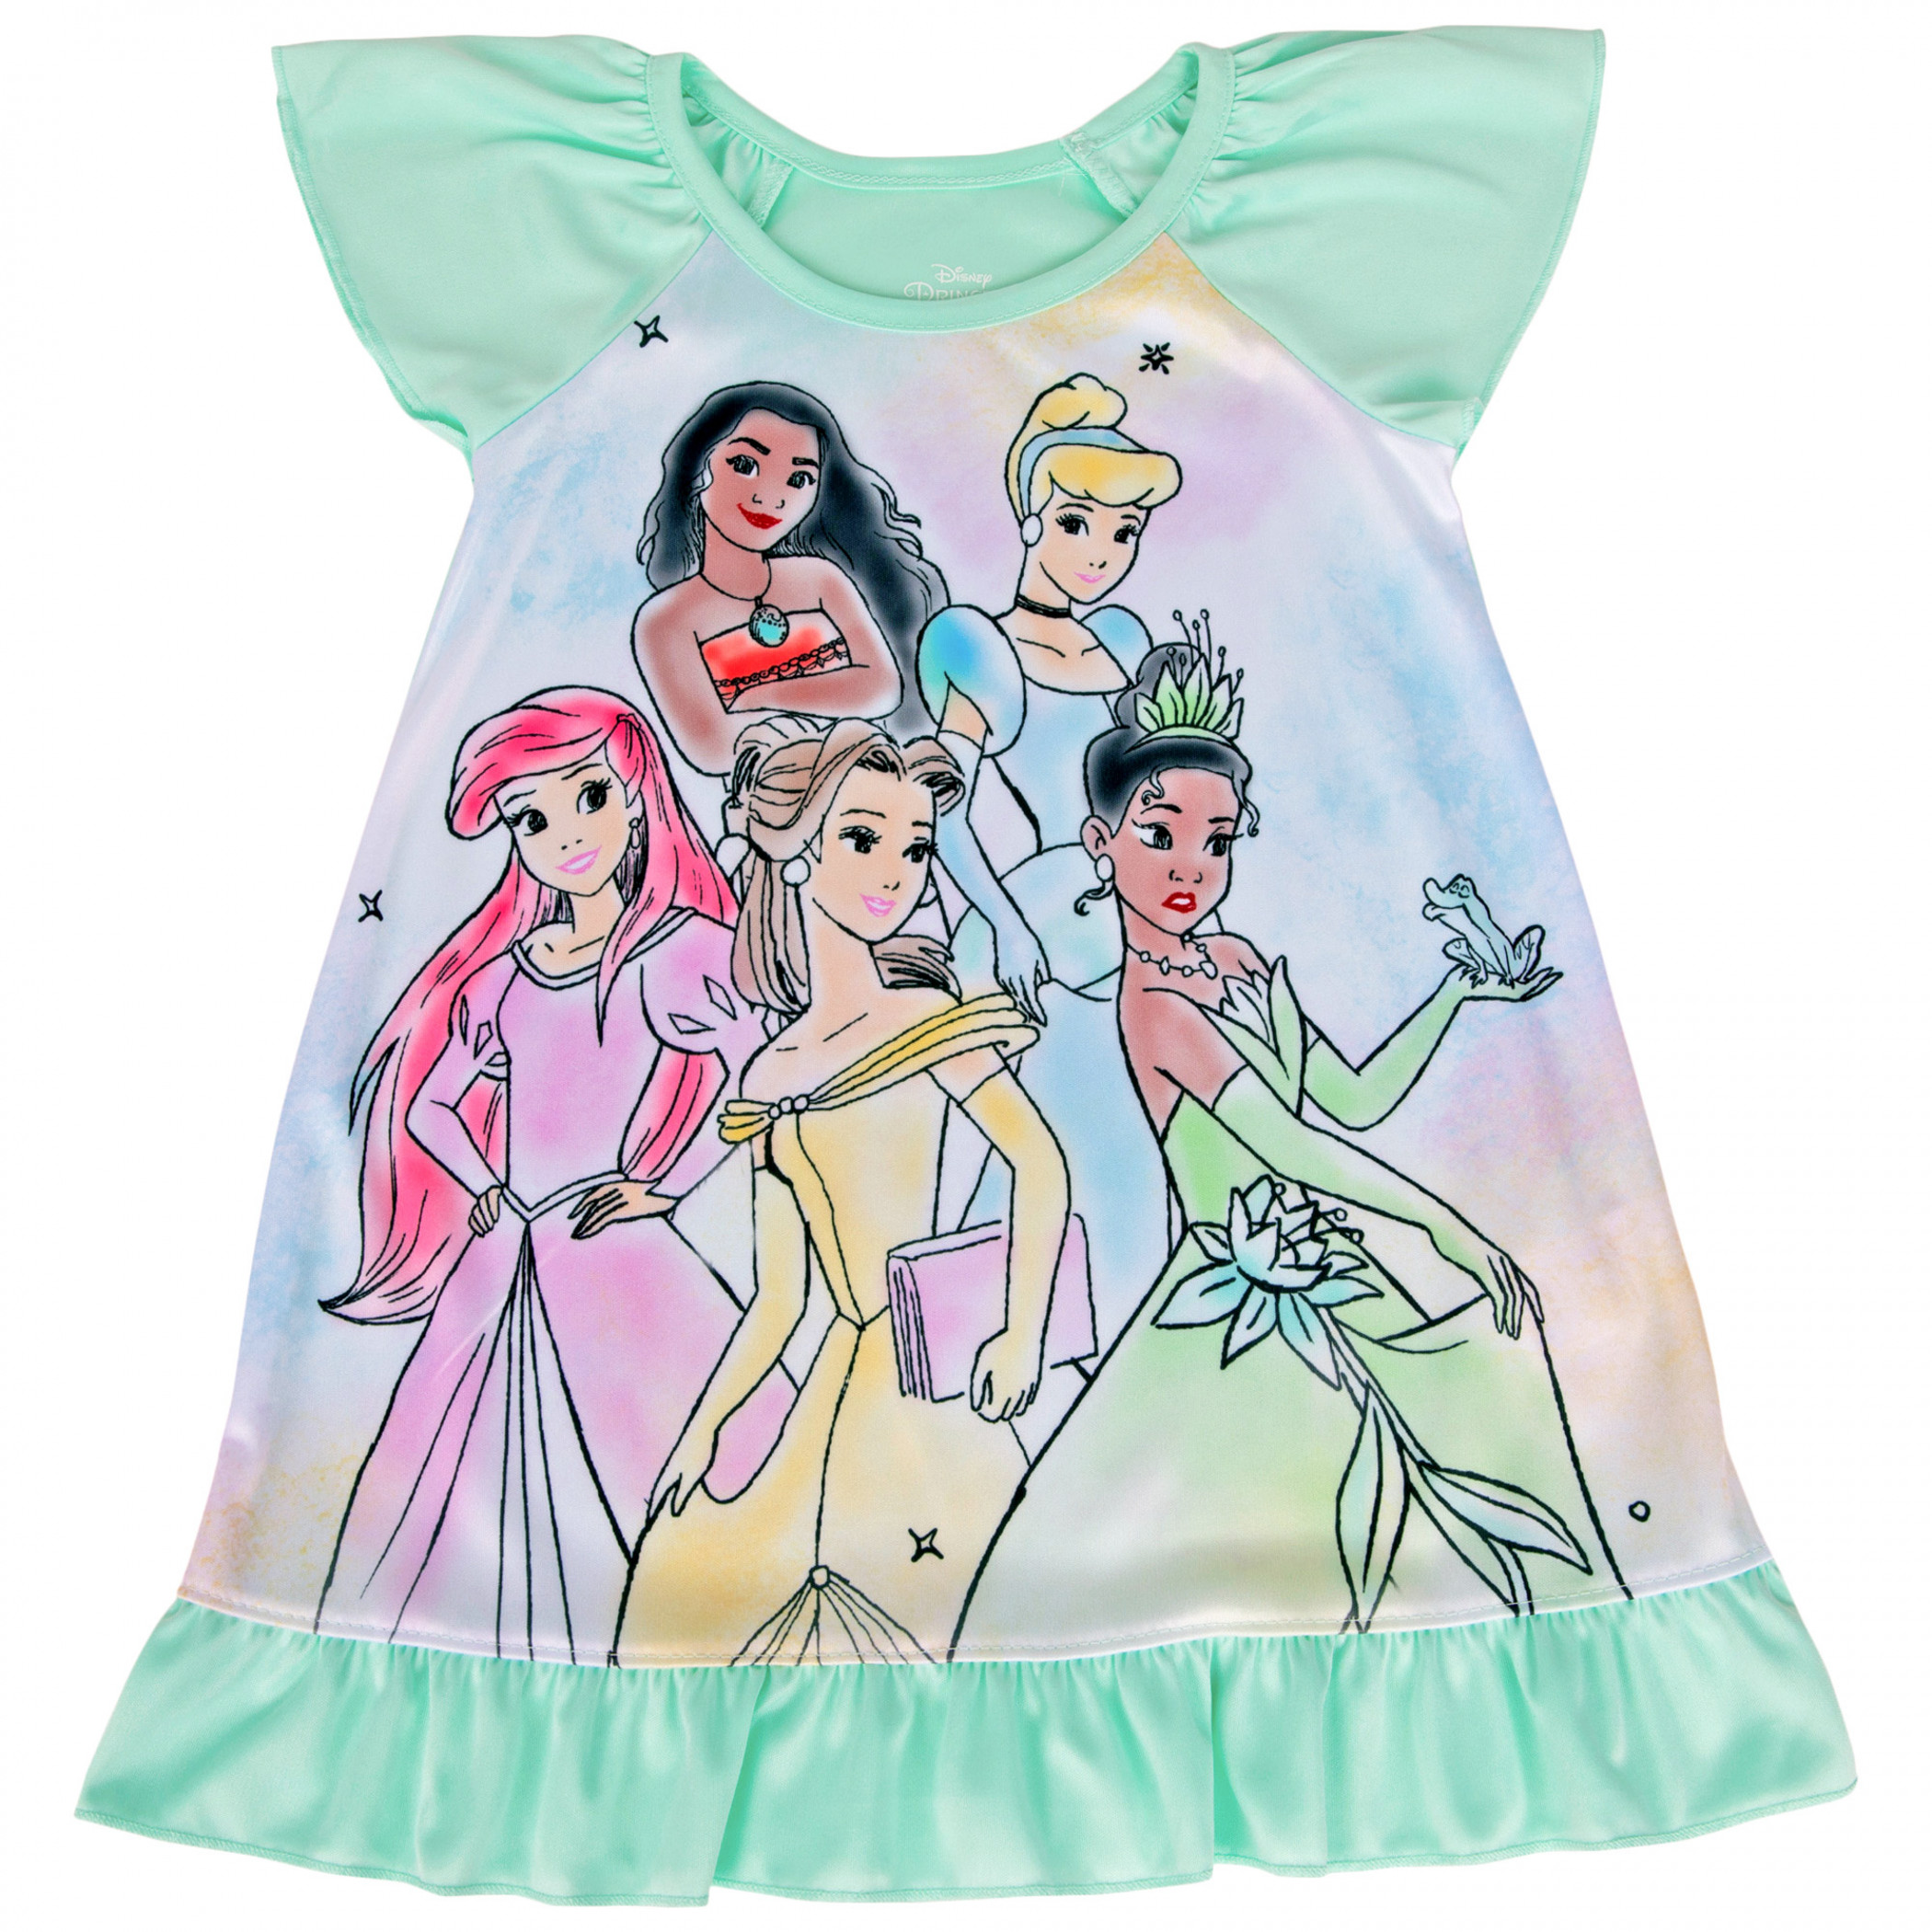 Disney Princesses Watercolor Style Girl's Toddler Nightgown